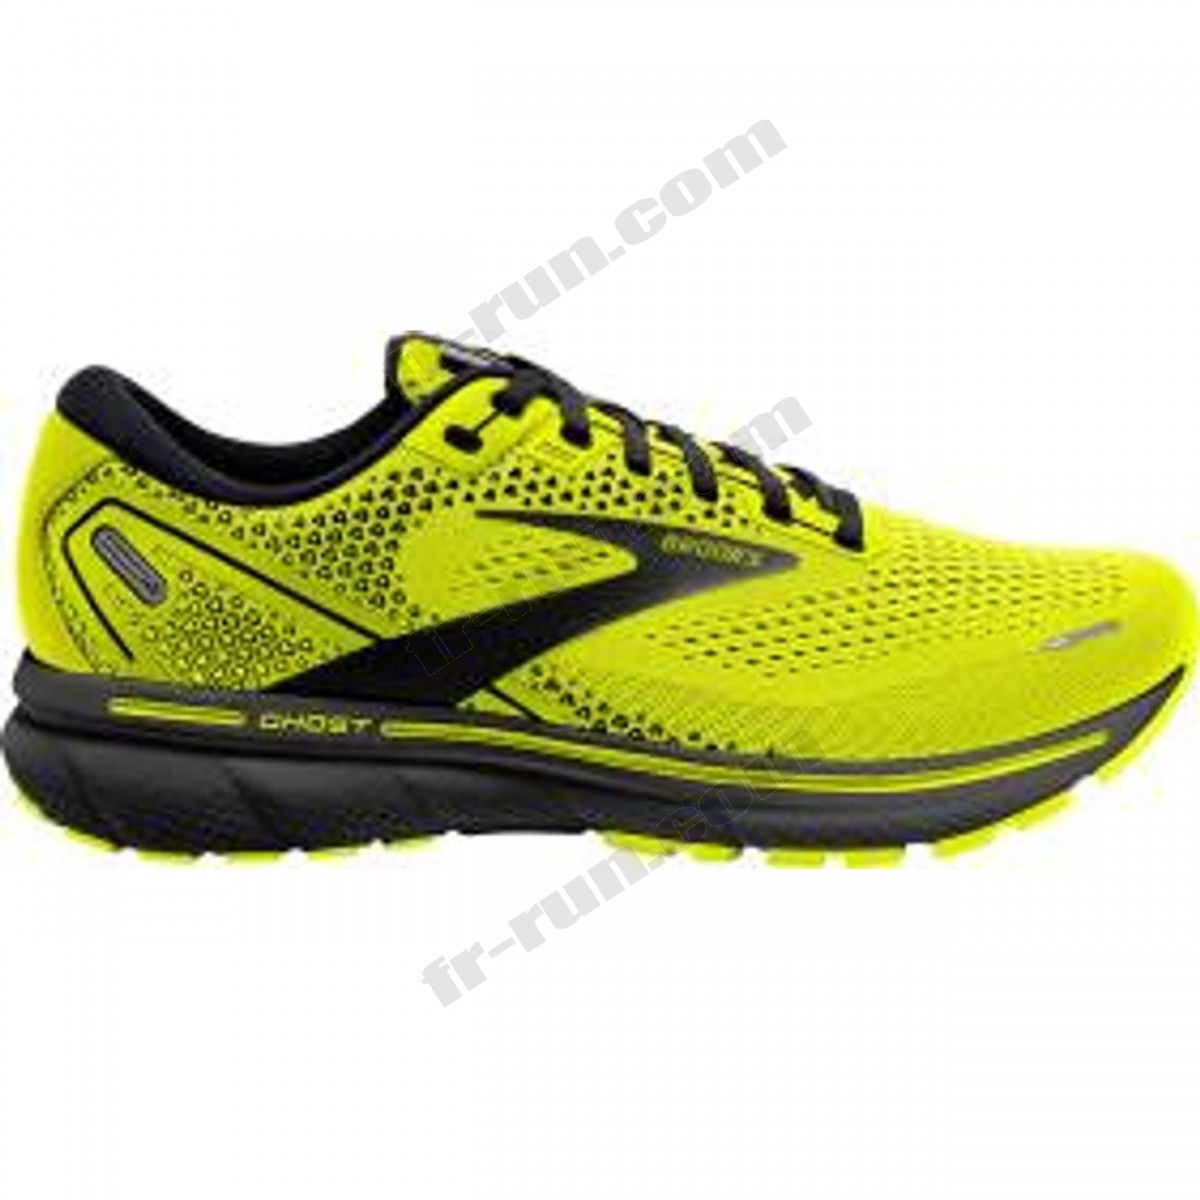 Brooks/CHAUSSURES DE RUNNING homme BROOKS GHOST 14 √ Nouveau style √ Soldes - -0